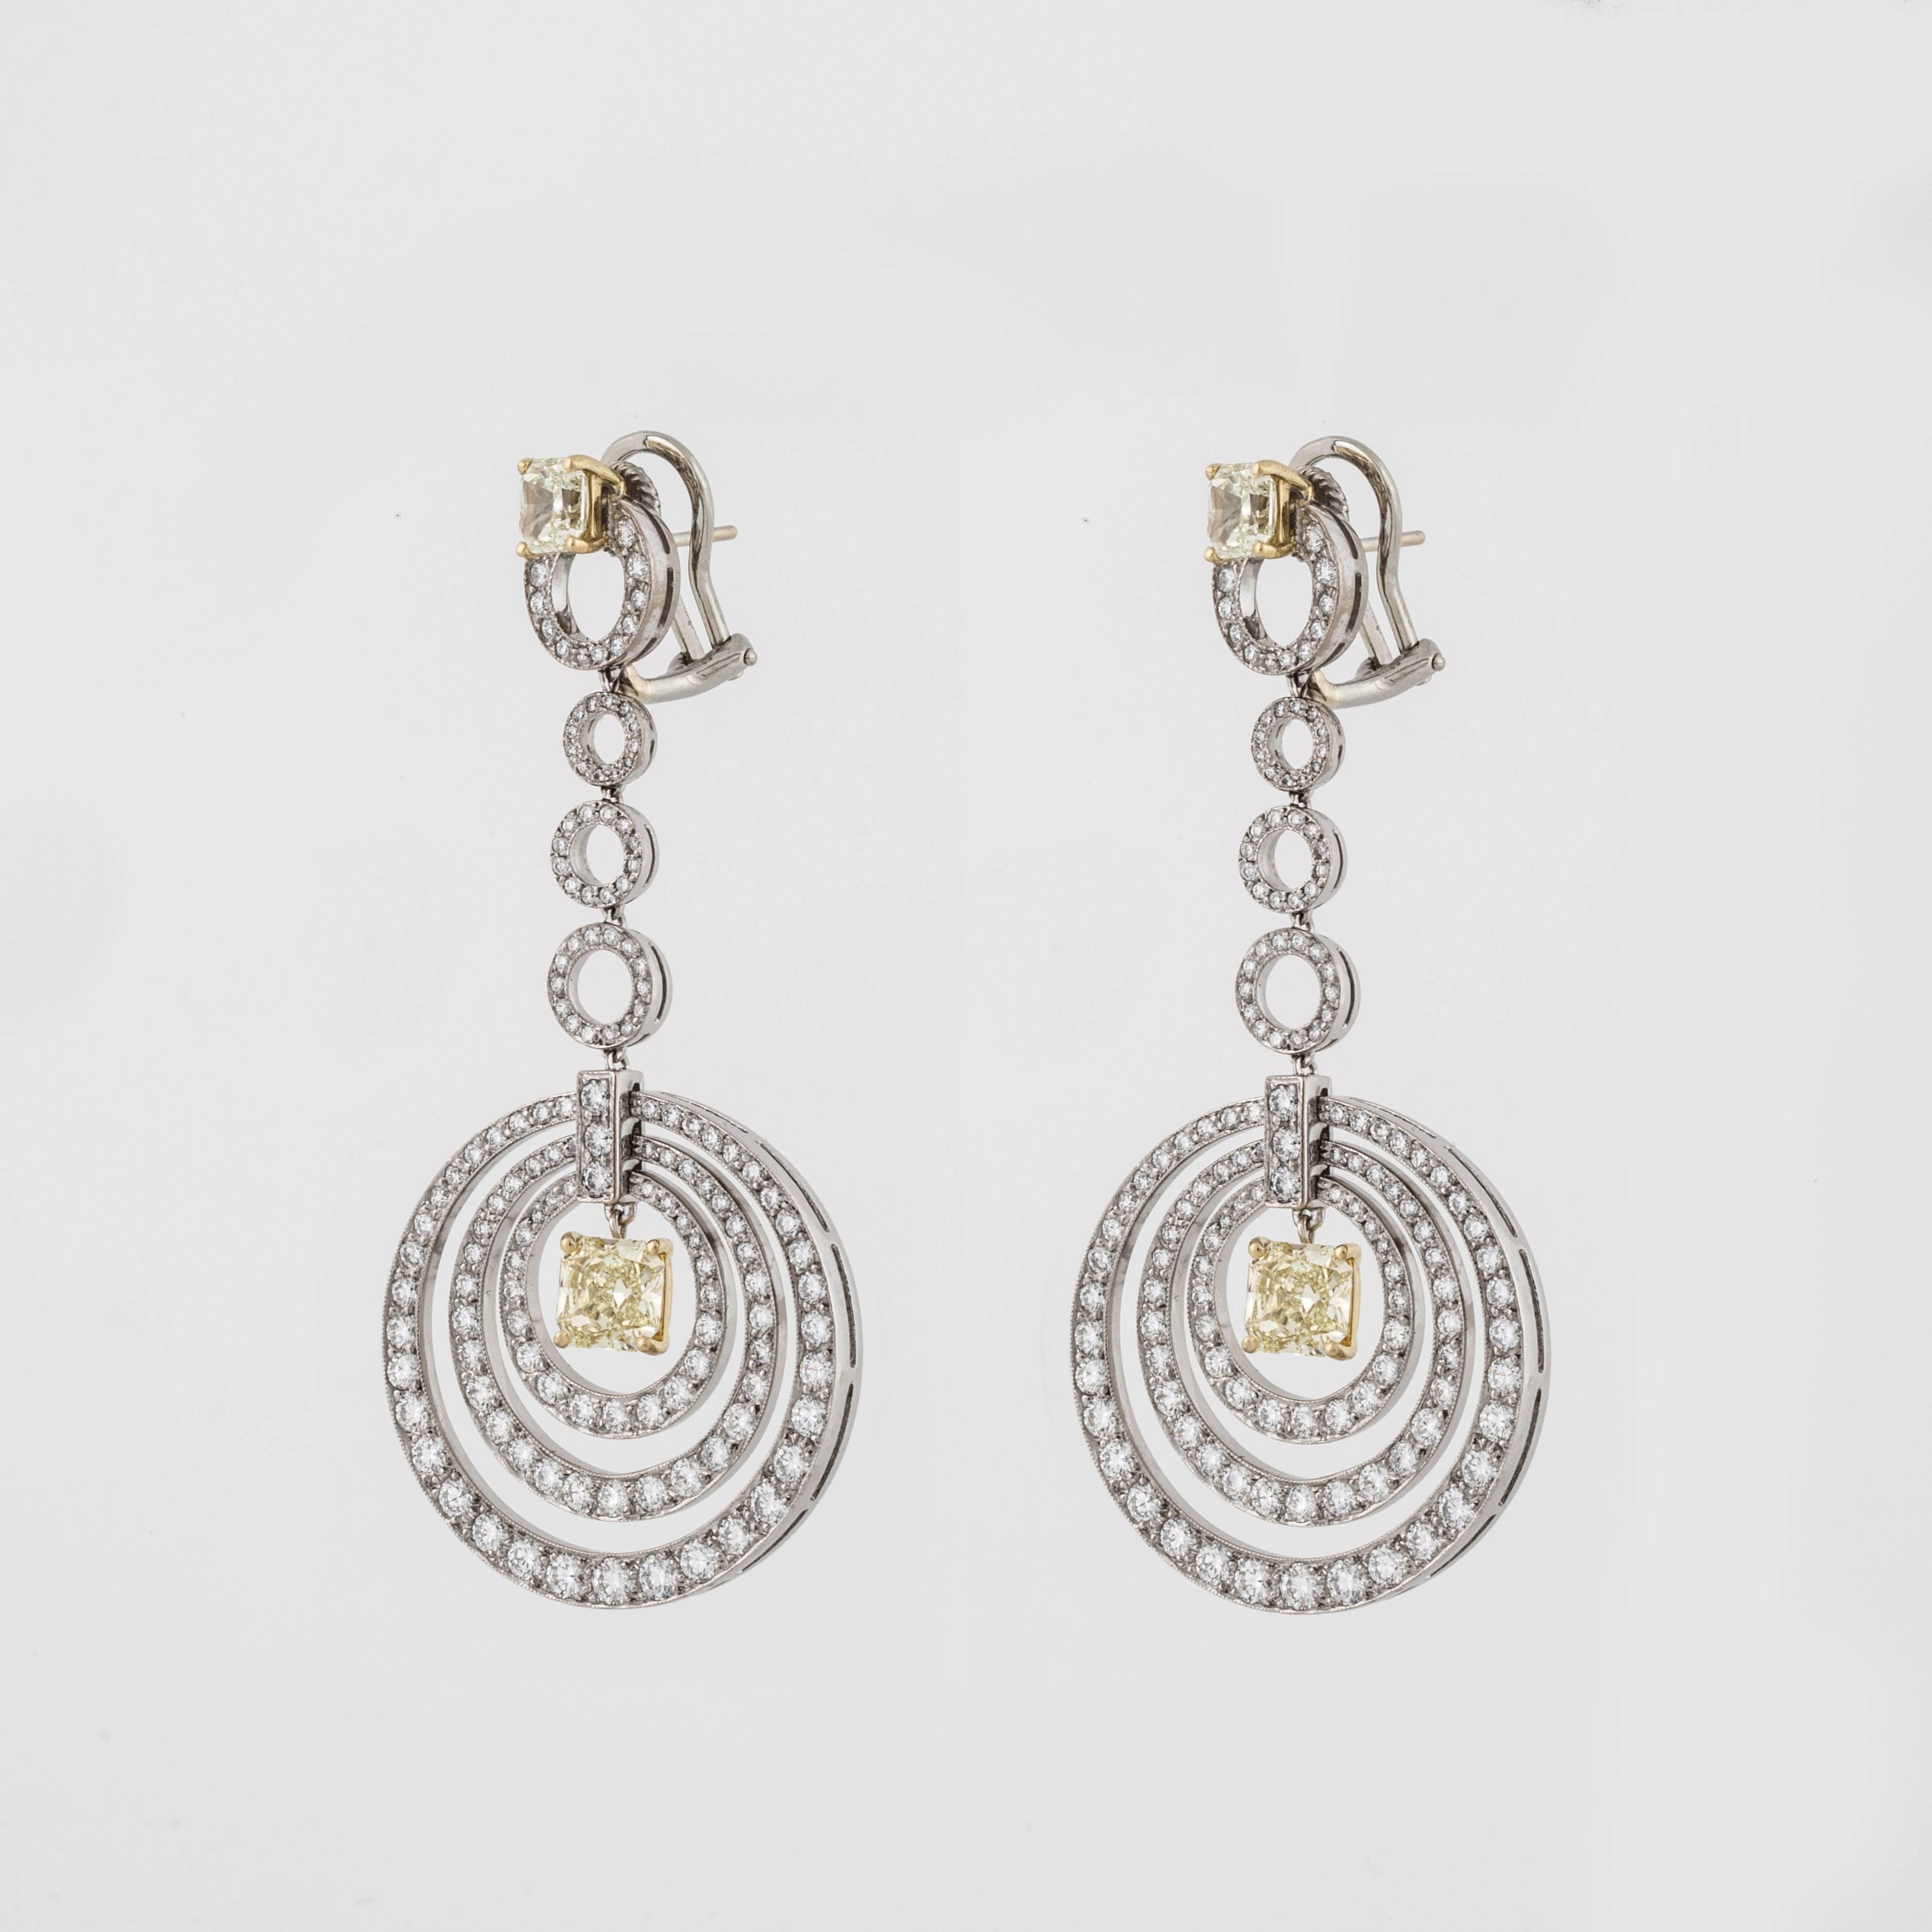 Graff earrings composed of 18K white and yellow gold with white and yellow diamonds.  The concentric circle design features 266 round brilliant-cut diamonds that total 6 carats, E-F color and VVS2-VS1 clarity.  There are four radiant-cut yellow